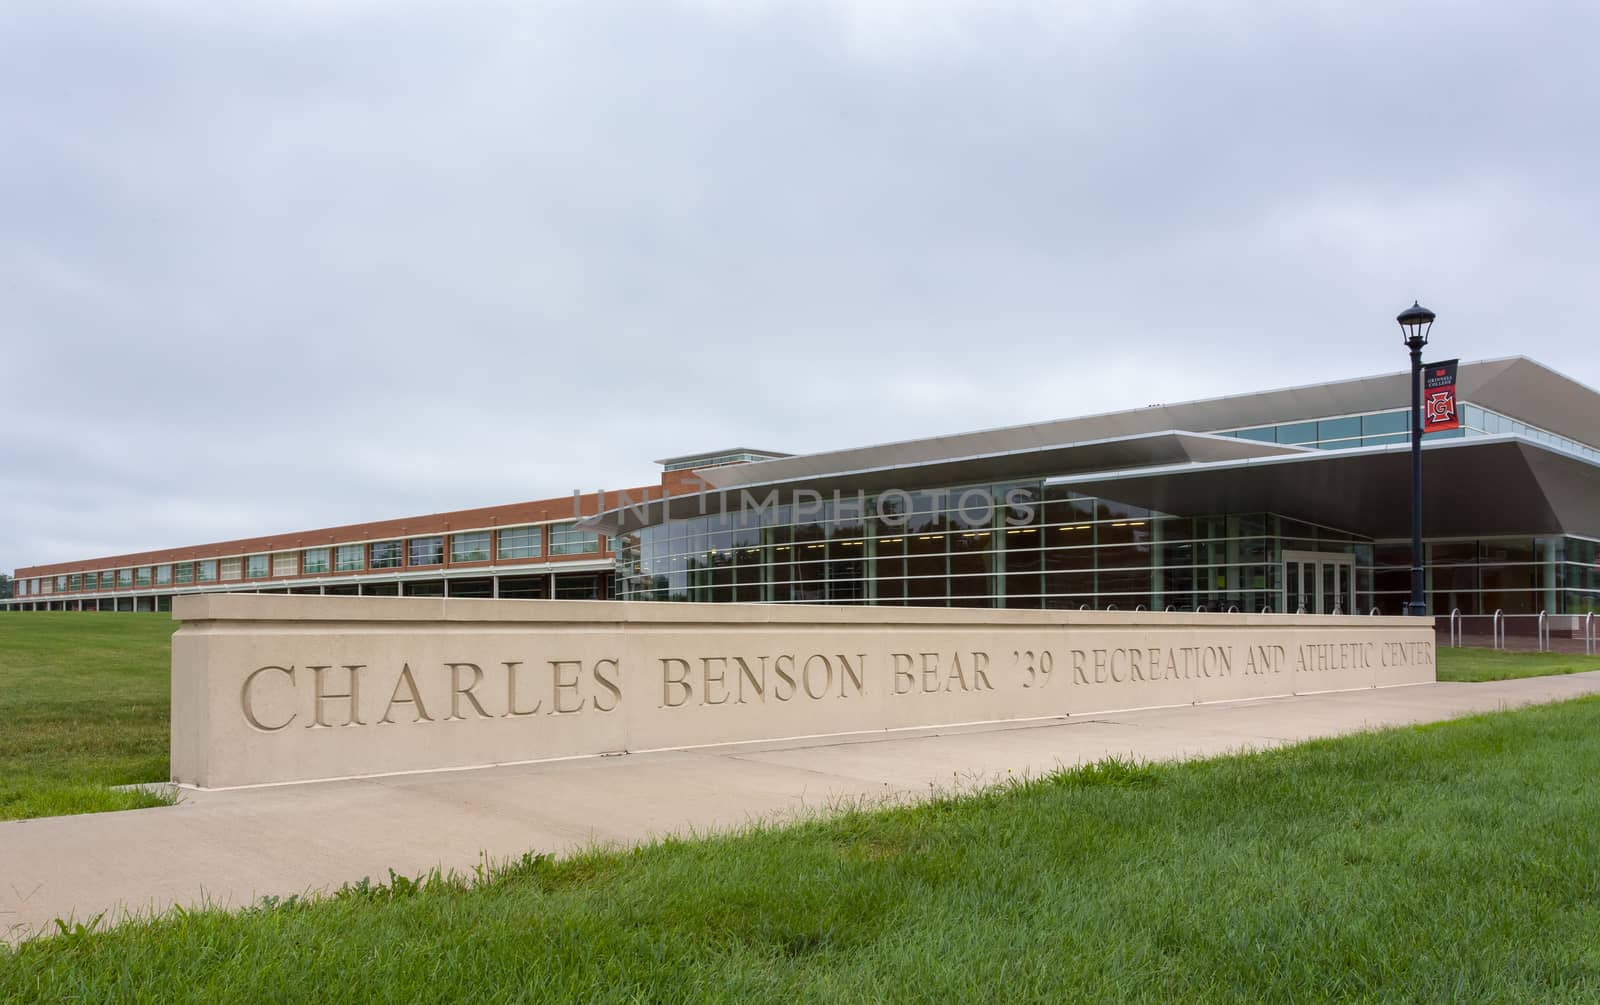 Charles Benson Bear Recreation Center on the campus of Grinell C by wolterk